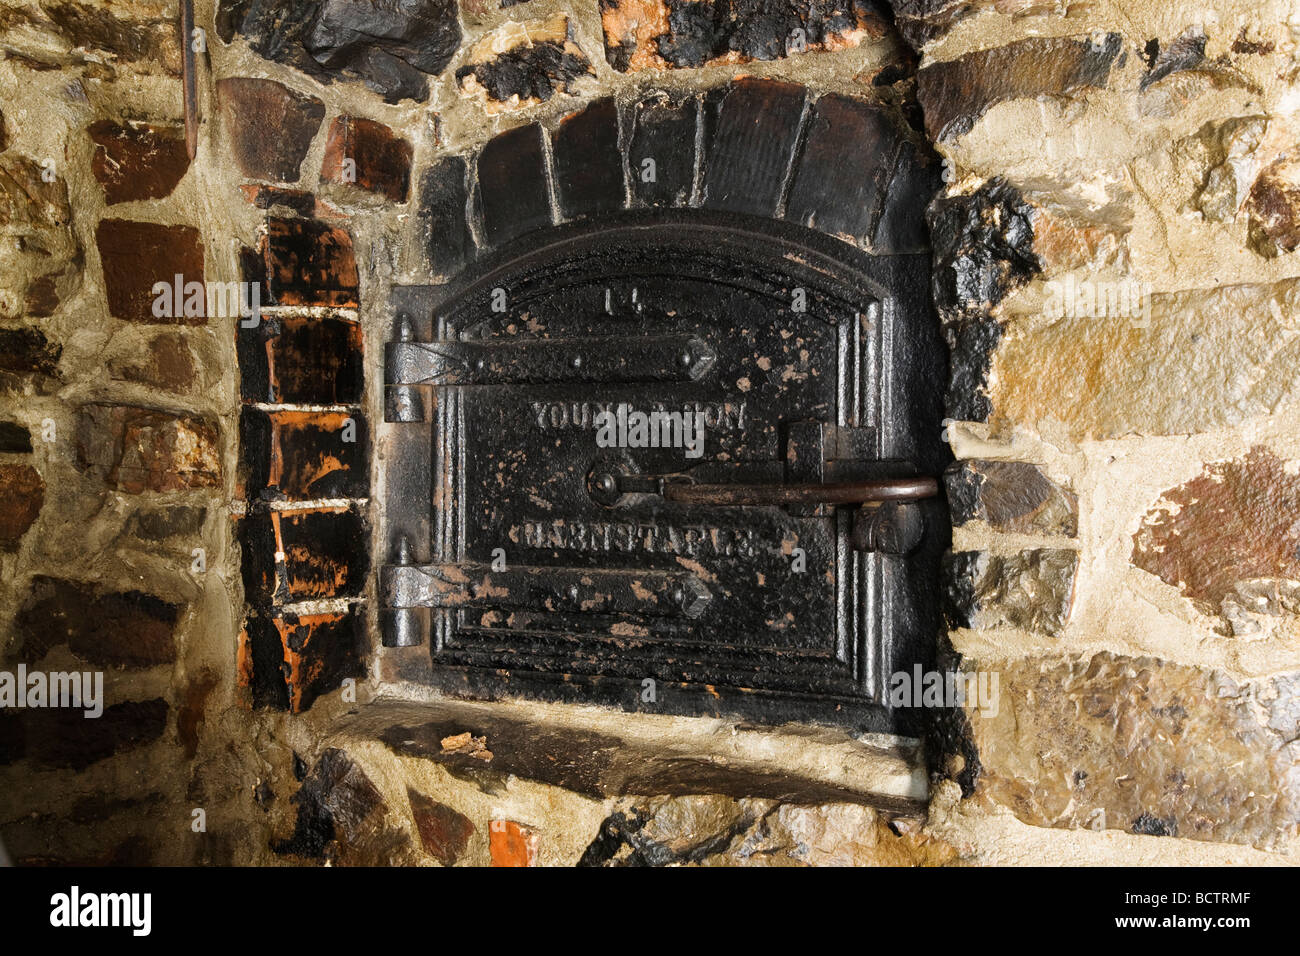 Victorian Cast Iron Bread Oven In An Inglenook Fireplace In A